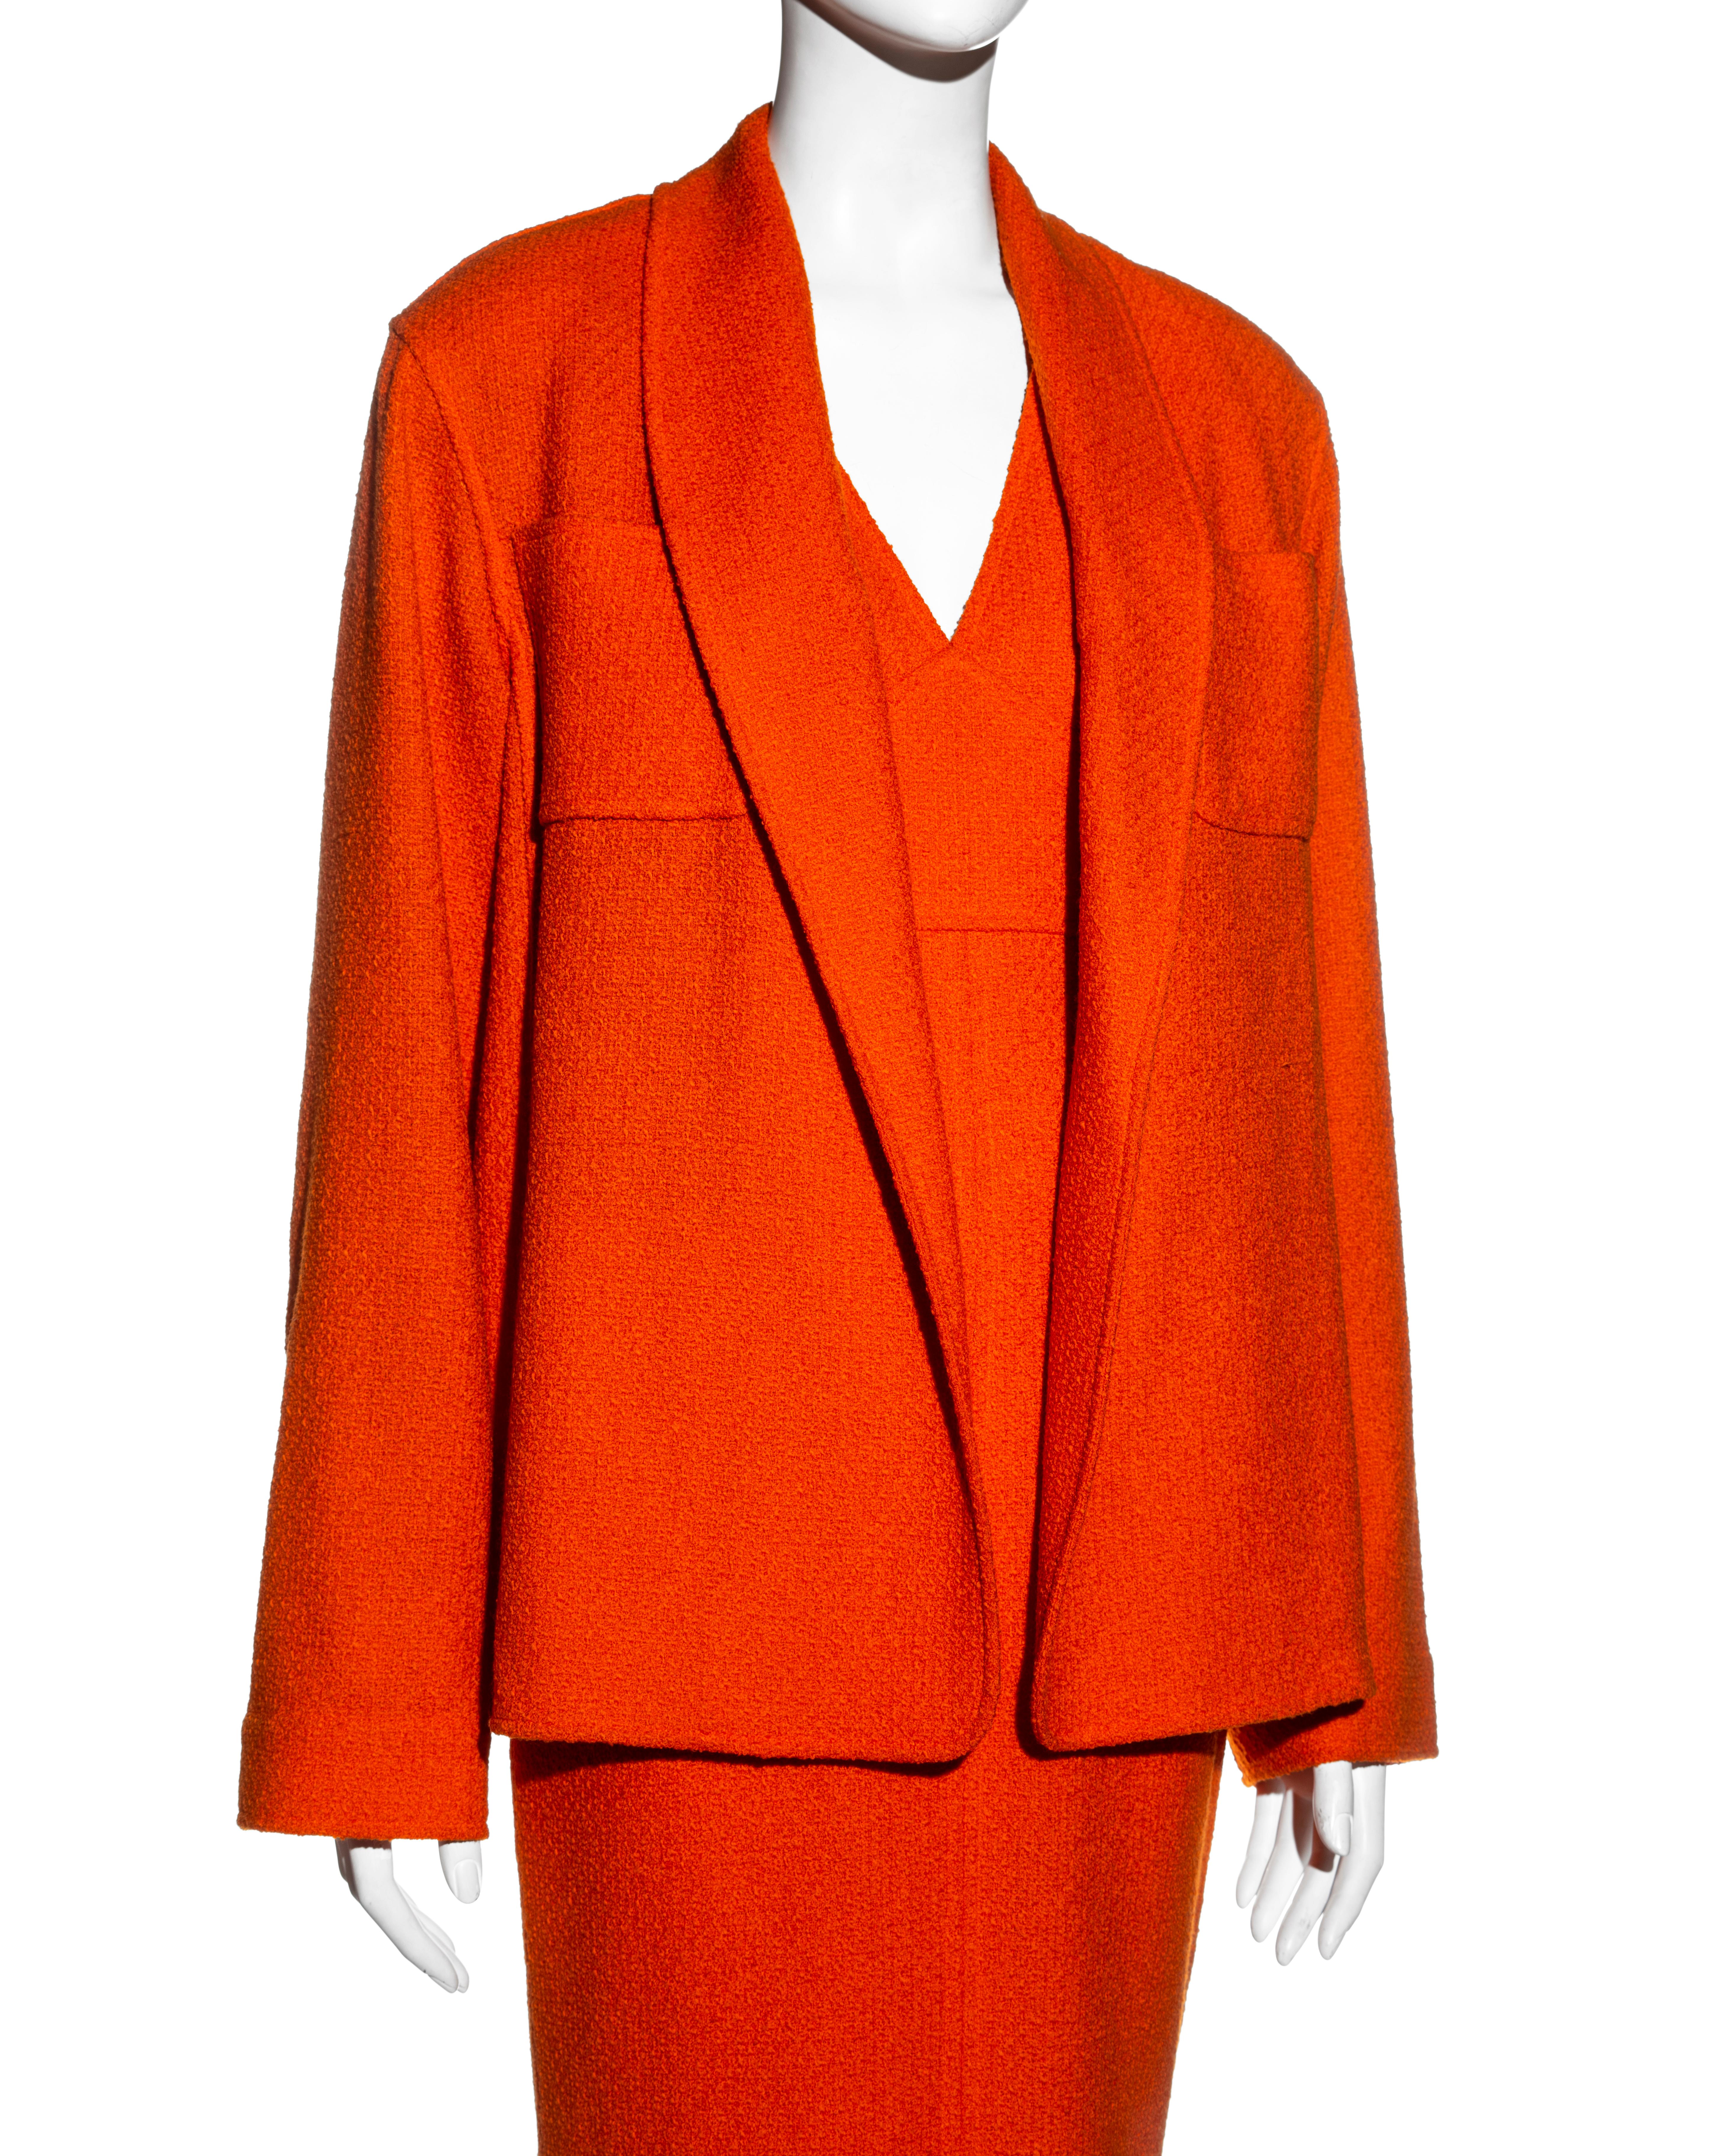 Chanel by Karl Lagerfeld orange bouclé wool dress and jacket set, fw 1995 In Excellent Condition For Sale In London, GB